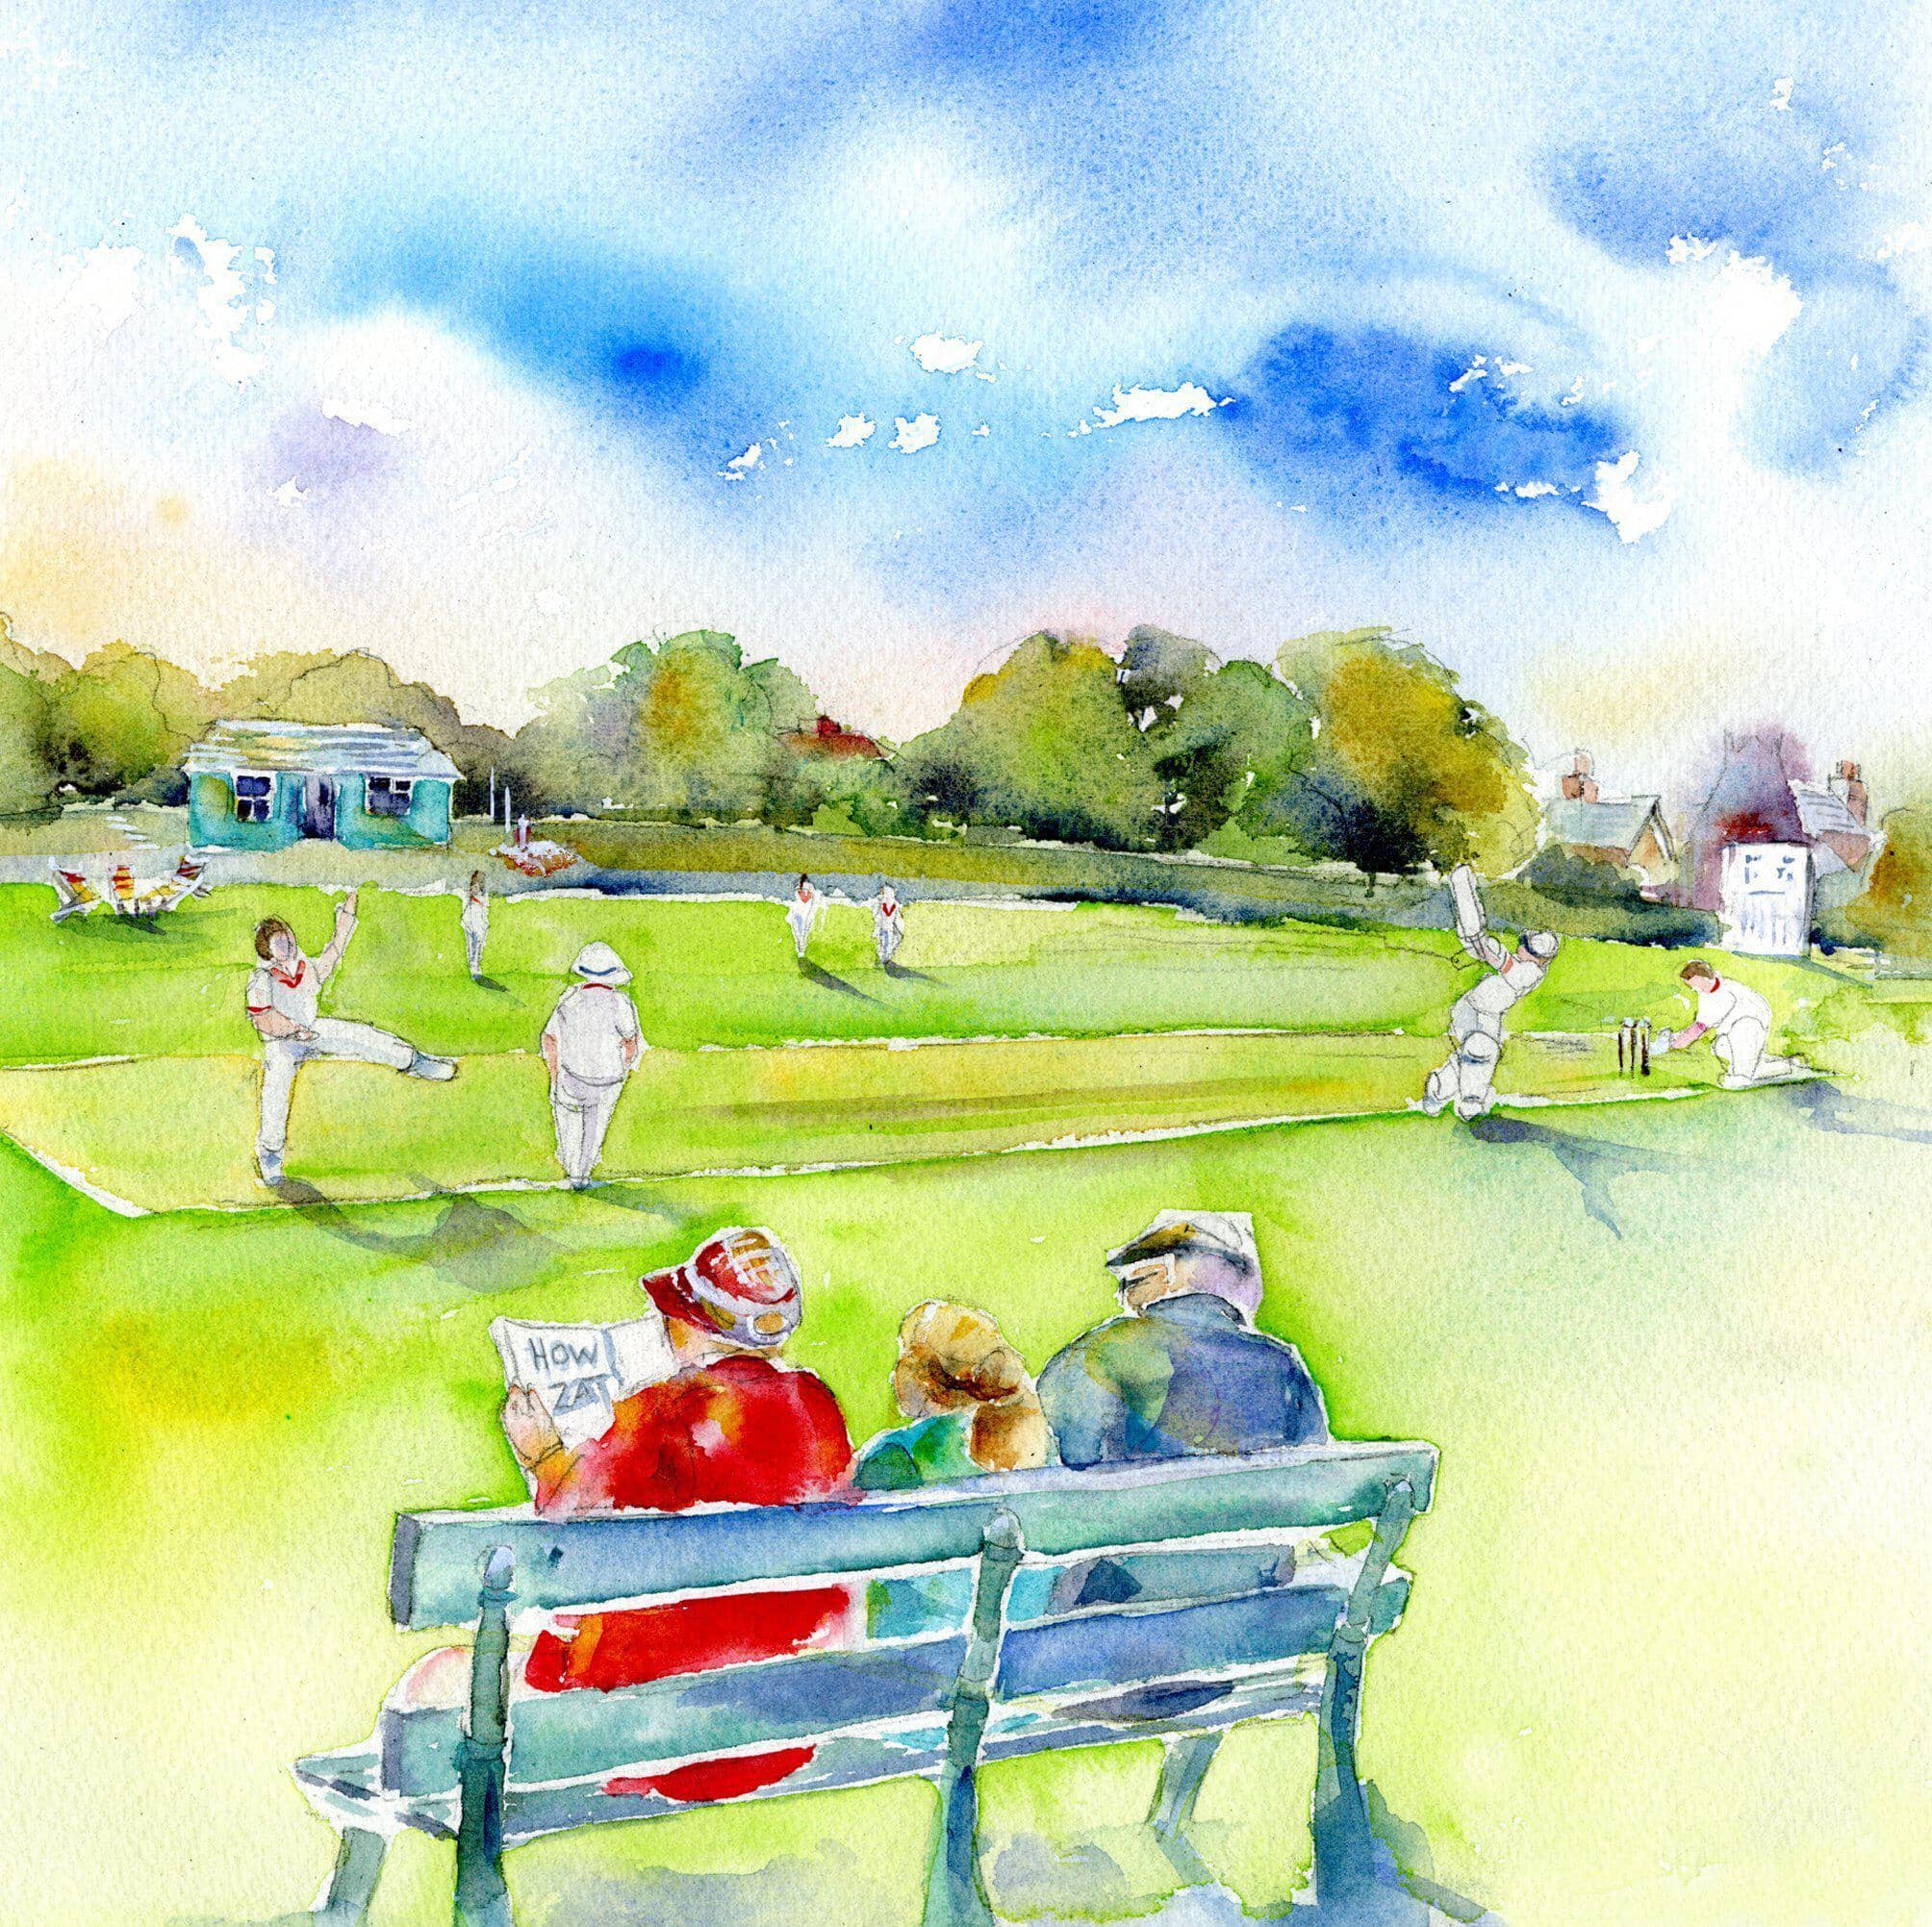 Cricket Match Greeting Card designed by artist Sheila Gill